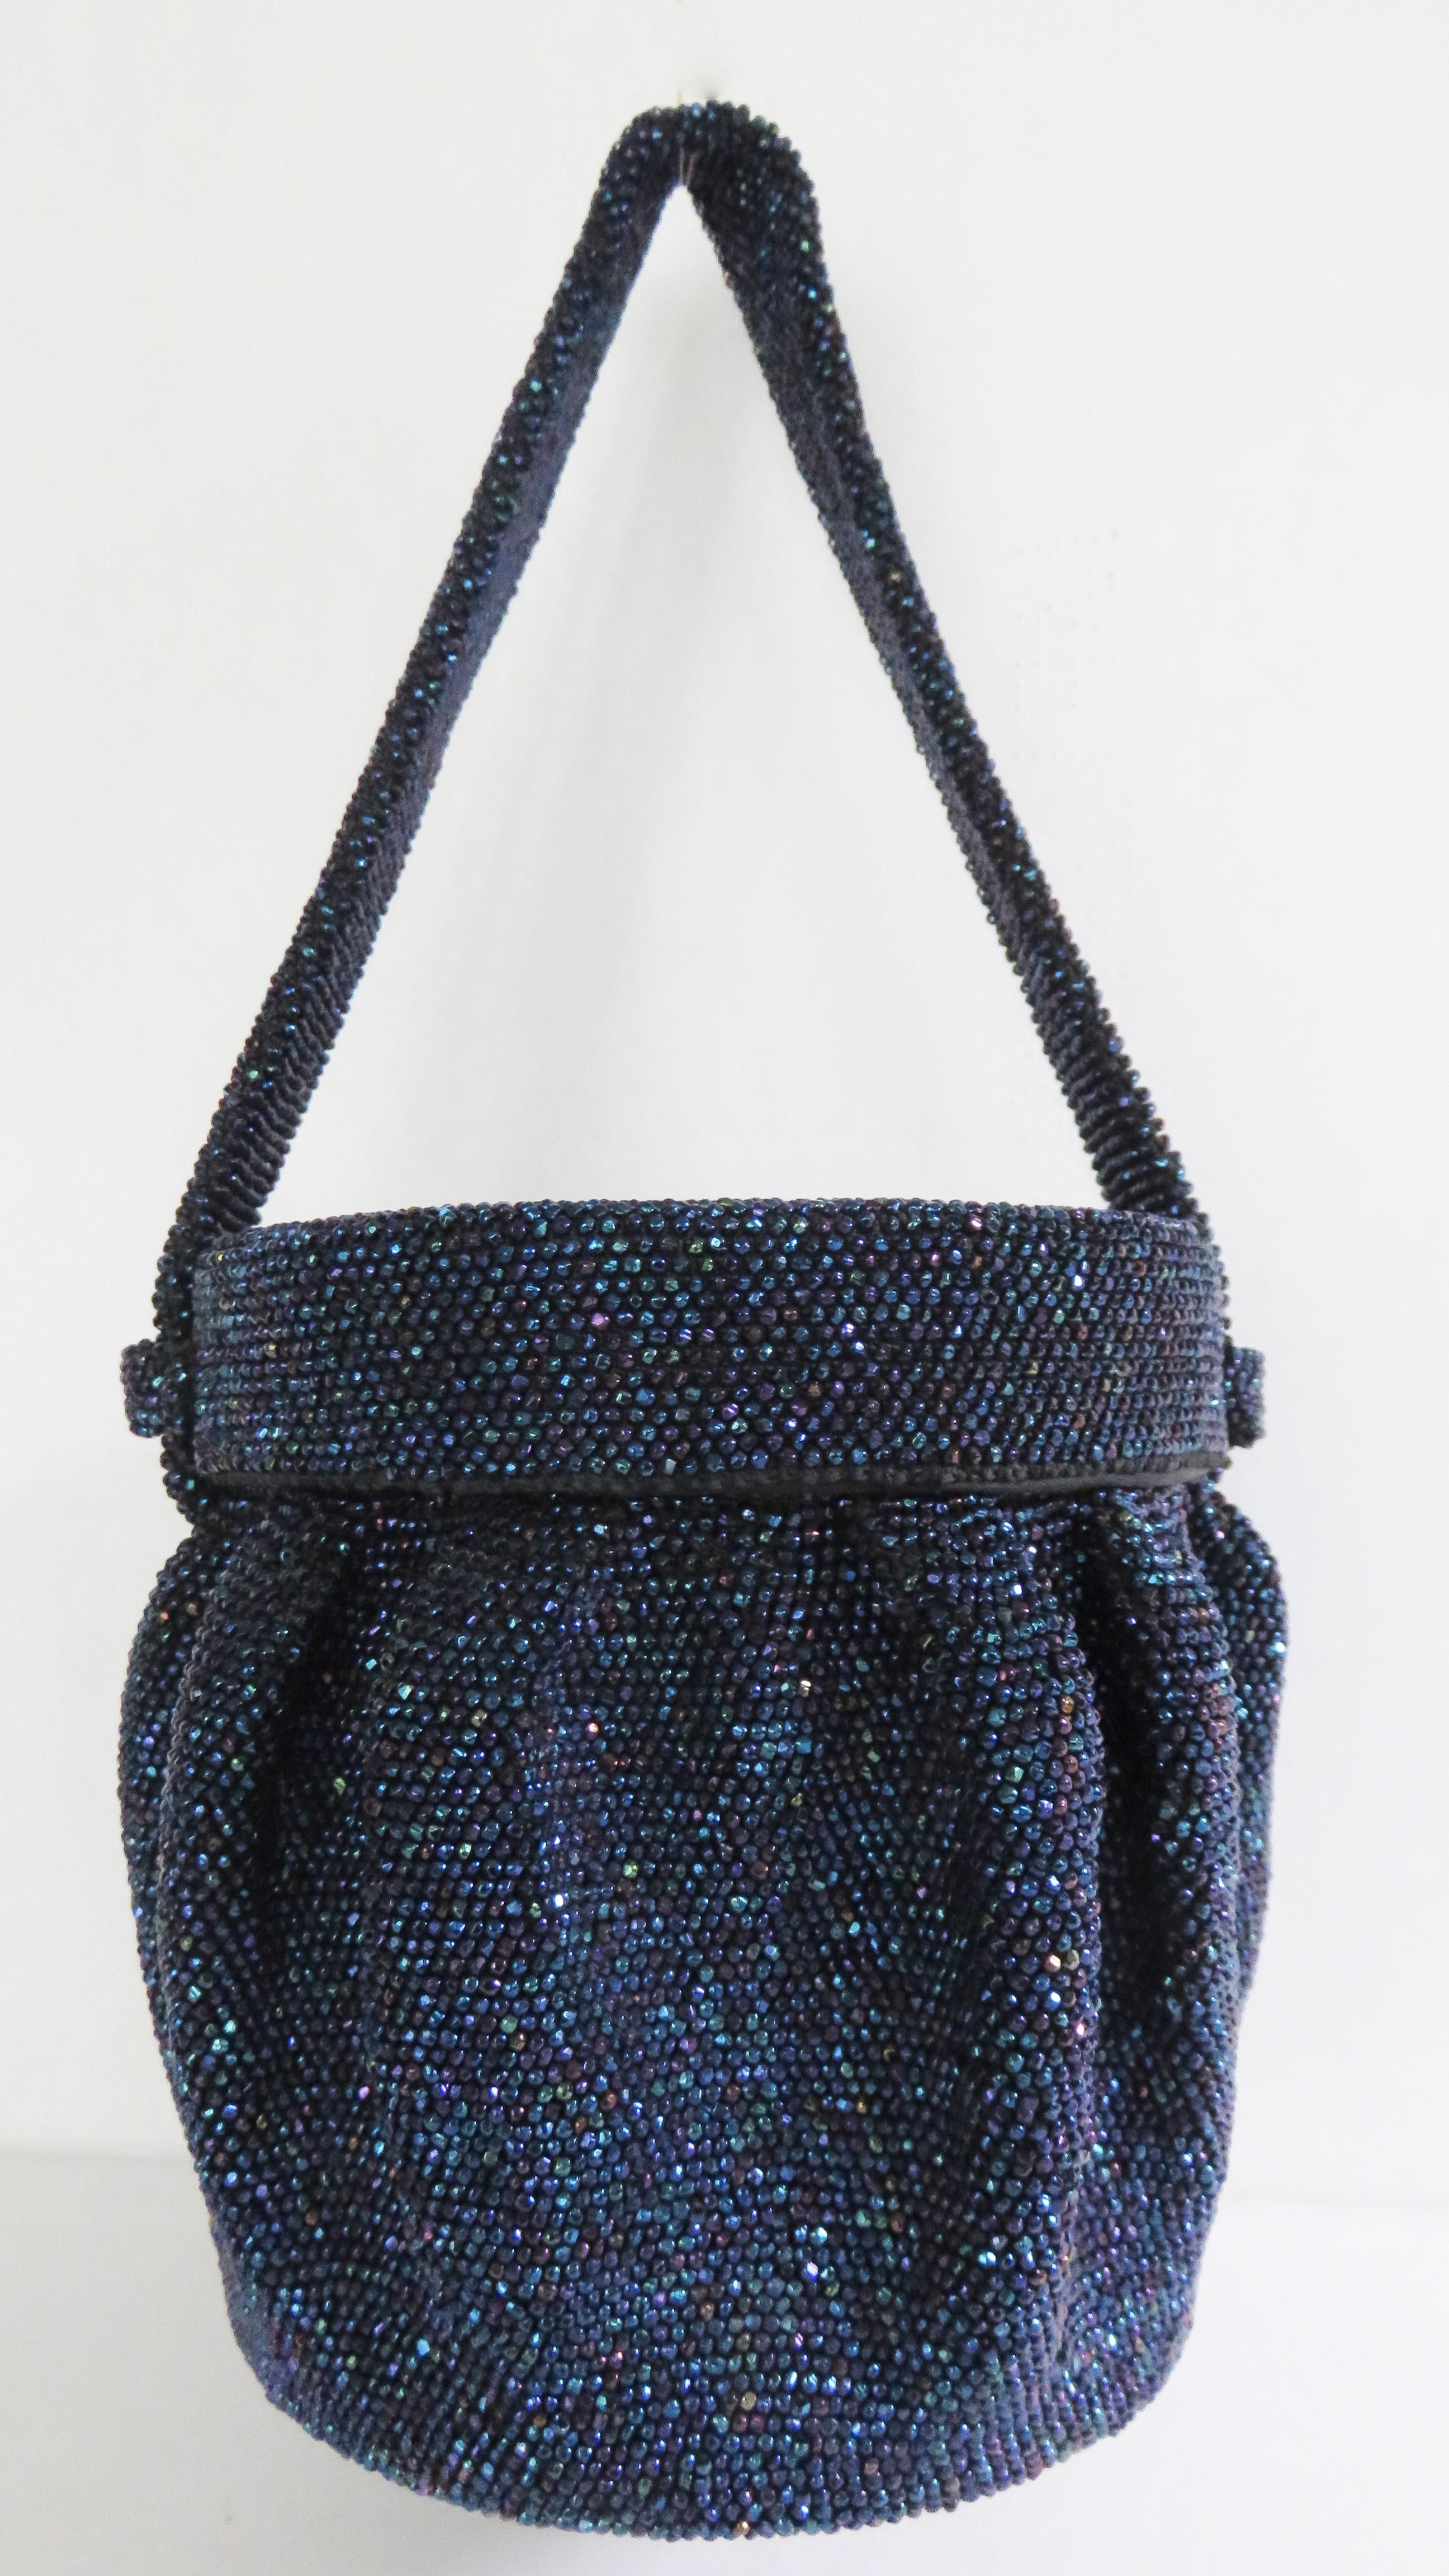 A spectacular midnight blue carnival glass beaded round box purse.  The handbag has vertical raised pleats around it's circumference, a round base and lid which remains attached to the top handle sliding along it to open. It is silk lined and has an